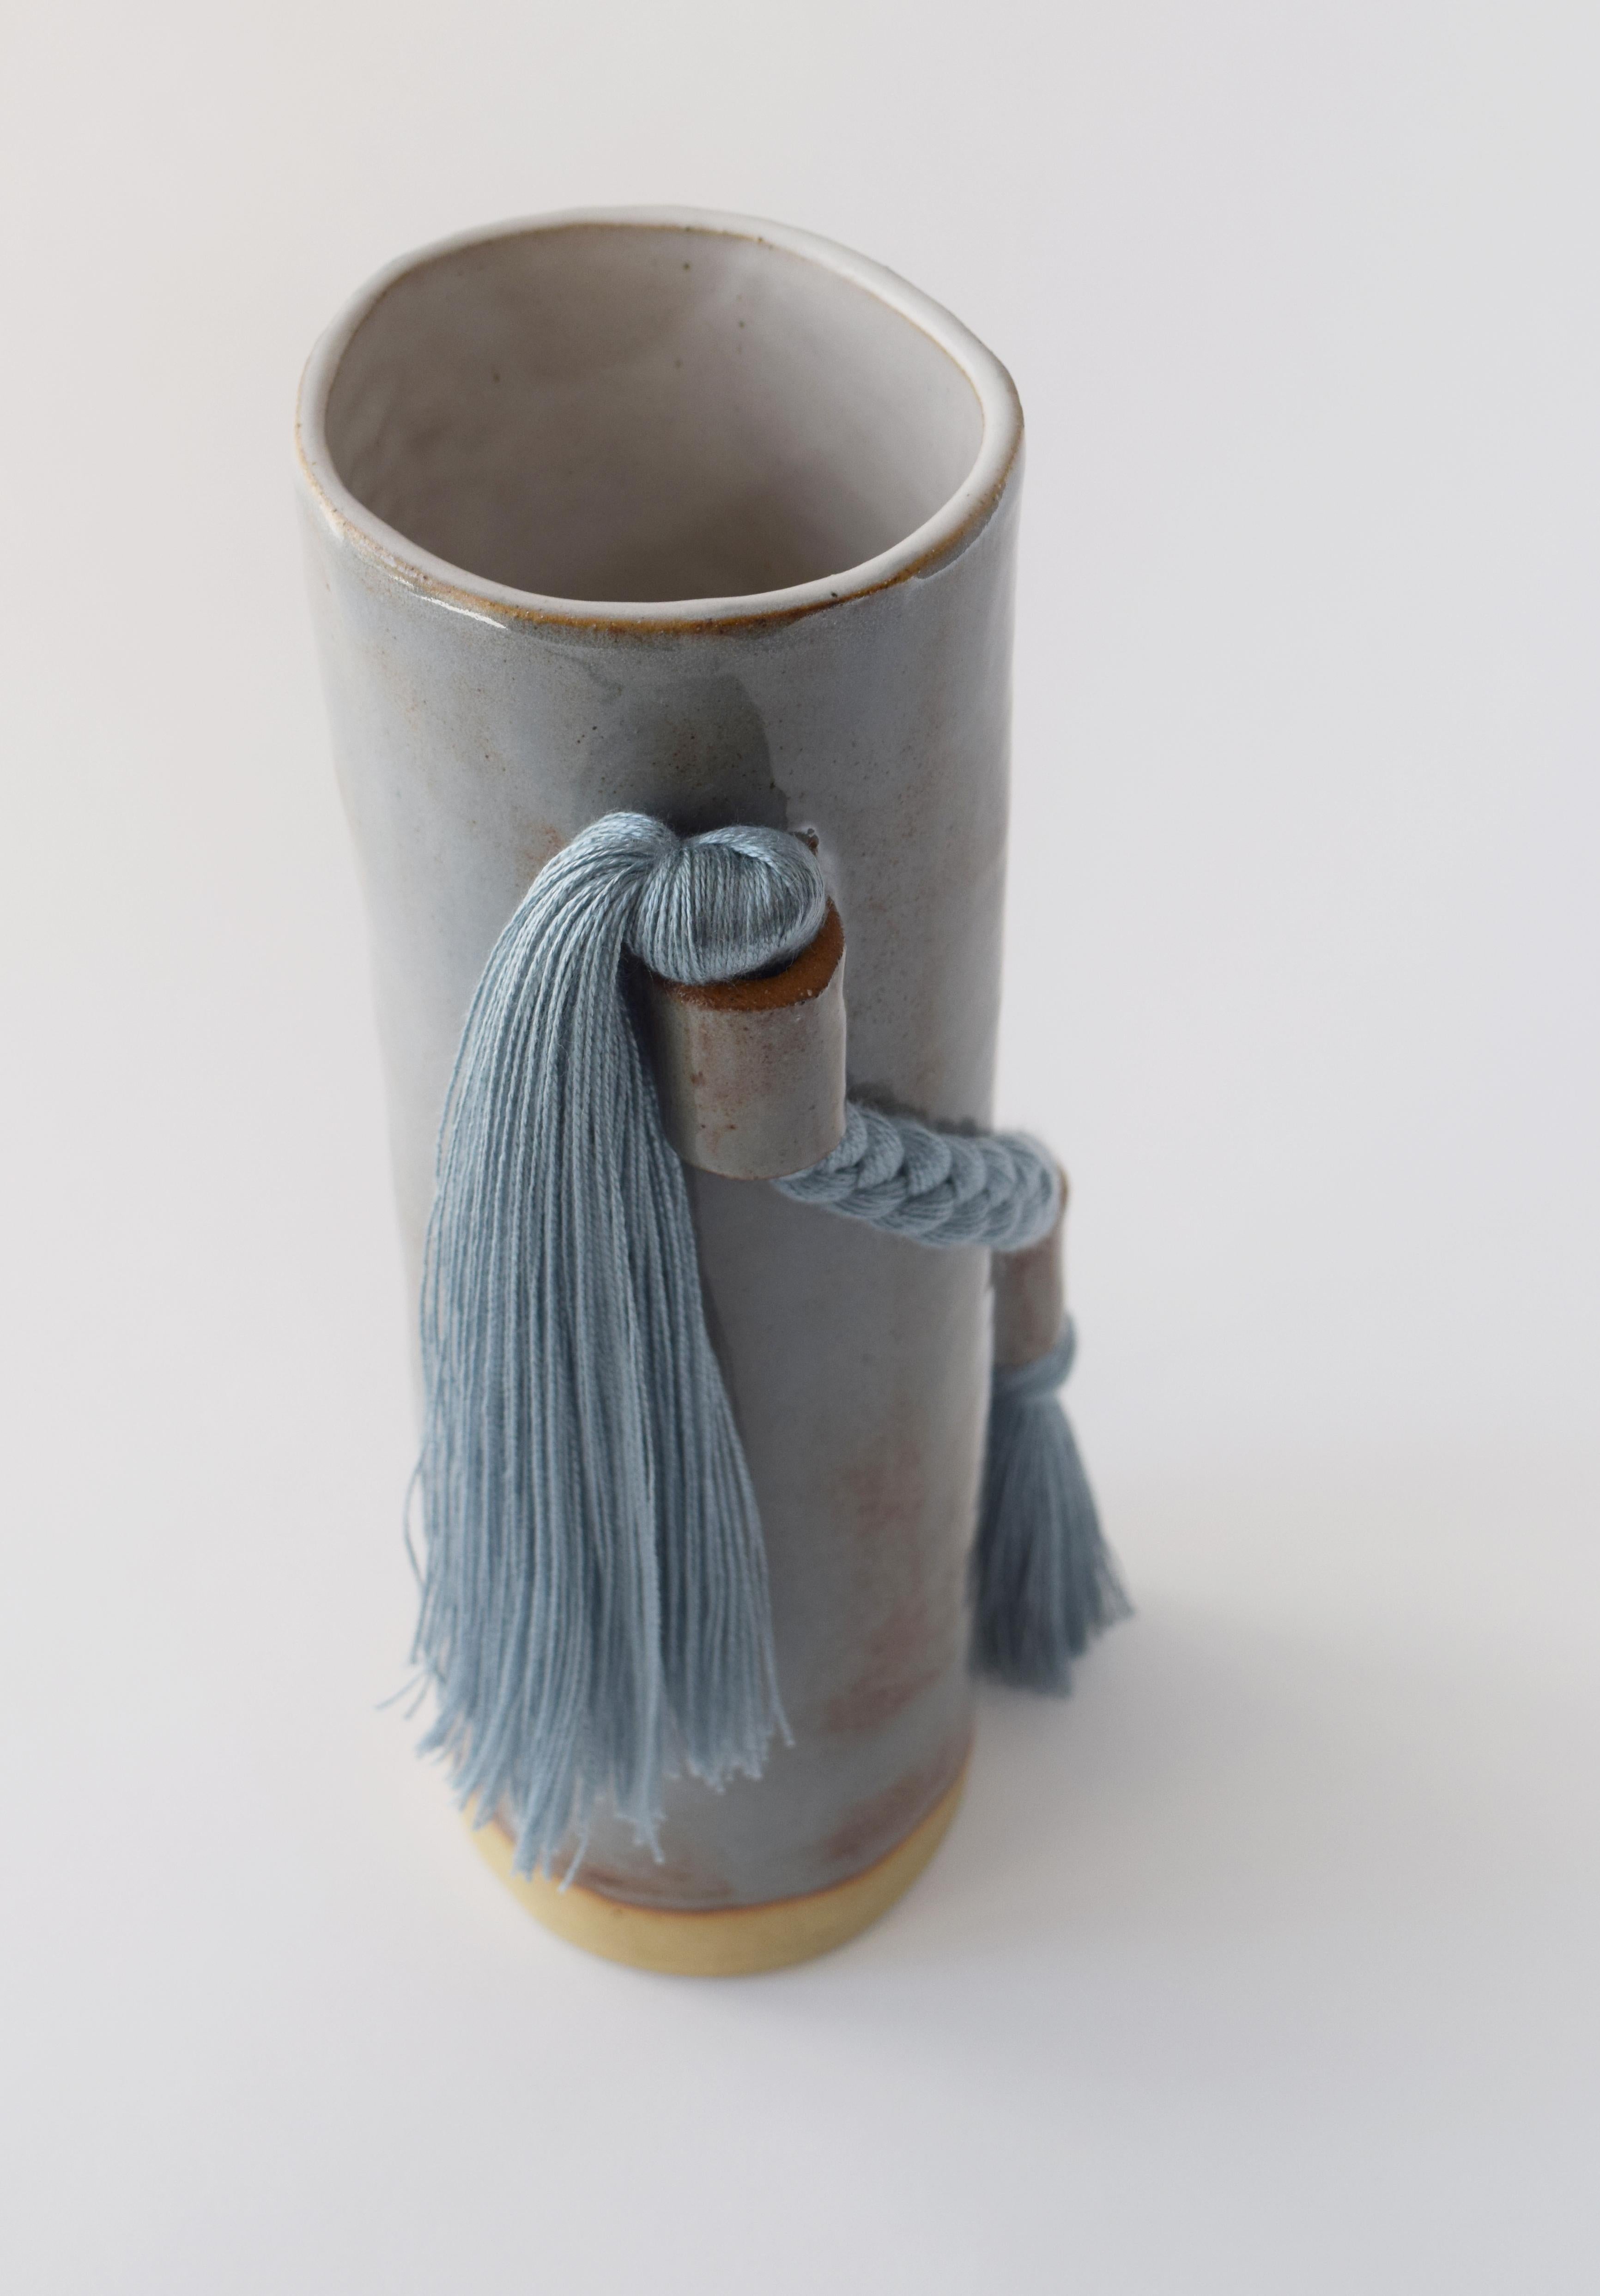 Hand-Crafted Handmade Ceramic Vase #695 in Light Blue with Blue Tencel Braid and Fringe For Sale